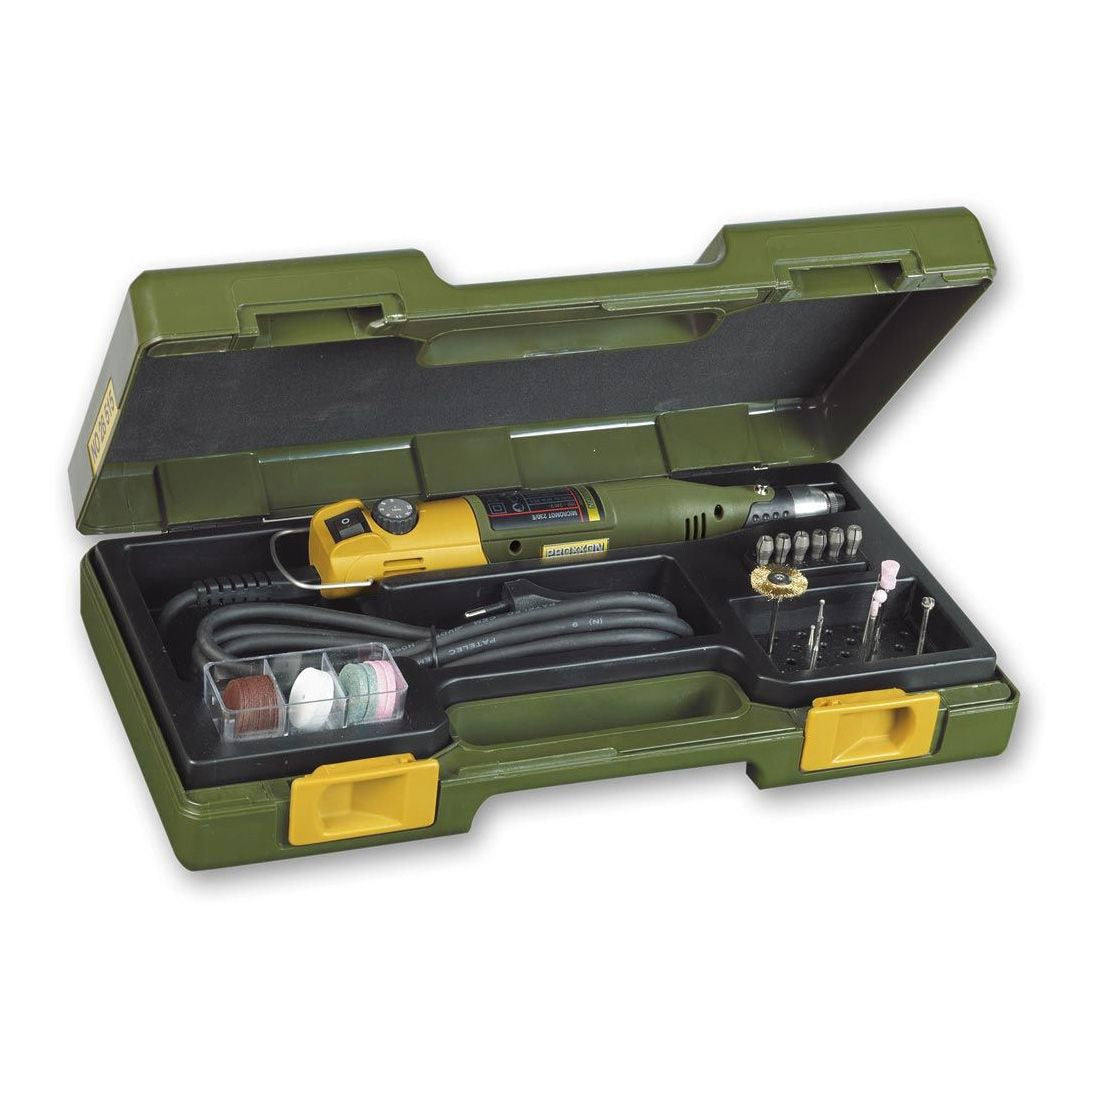 Proxxon Micromot 230/E Mill/Drill Set is supplied in a case with cutting discs, 6 collets and grinding polishing tips. 230v mains power.